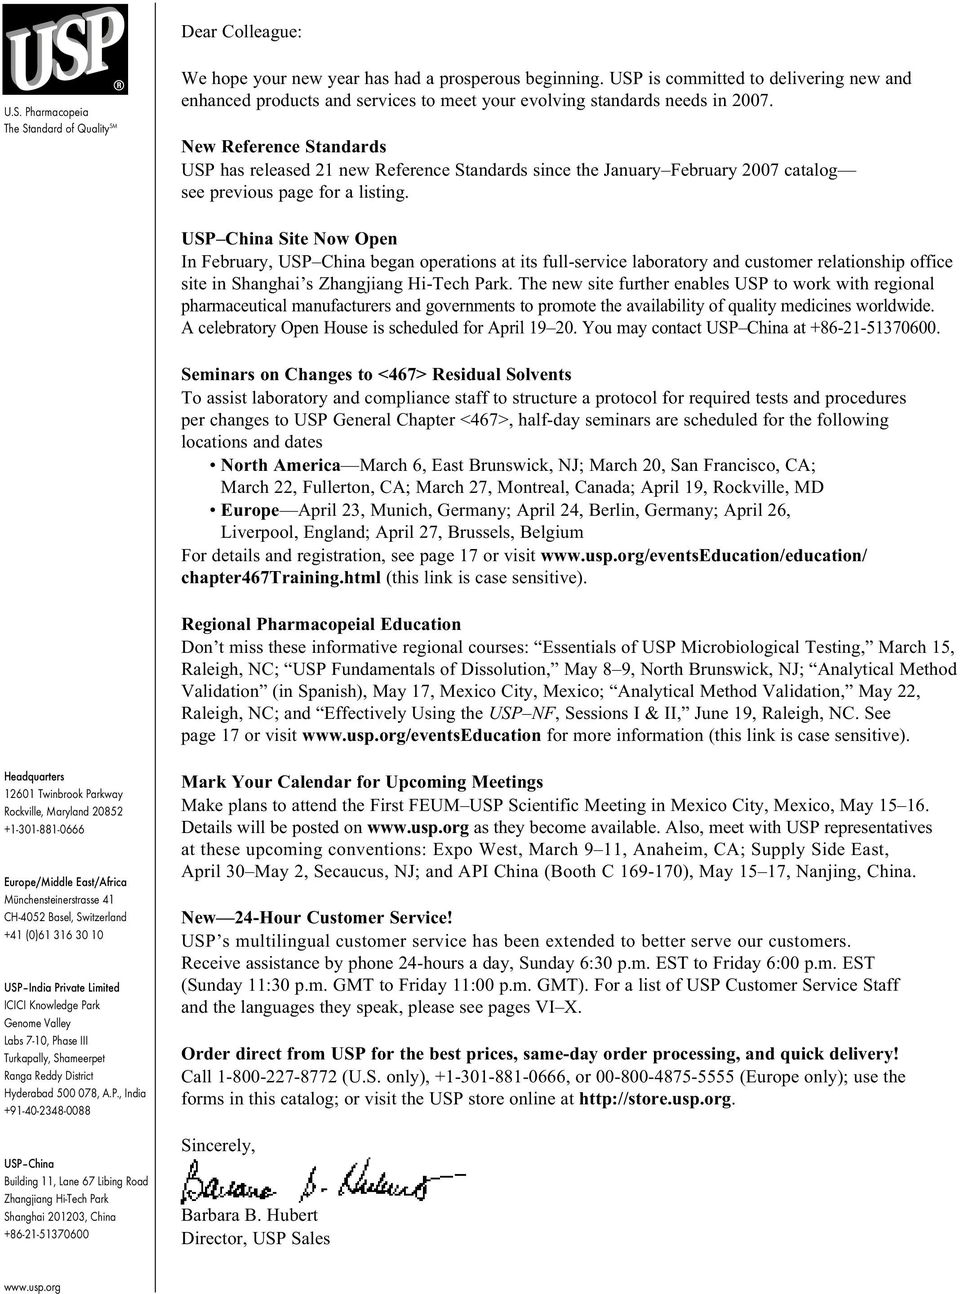 New Reference Standards USP has released 21 new Reference Standards since the January February 2007 catalog see previous page for a listing.